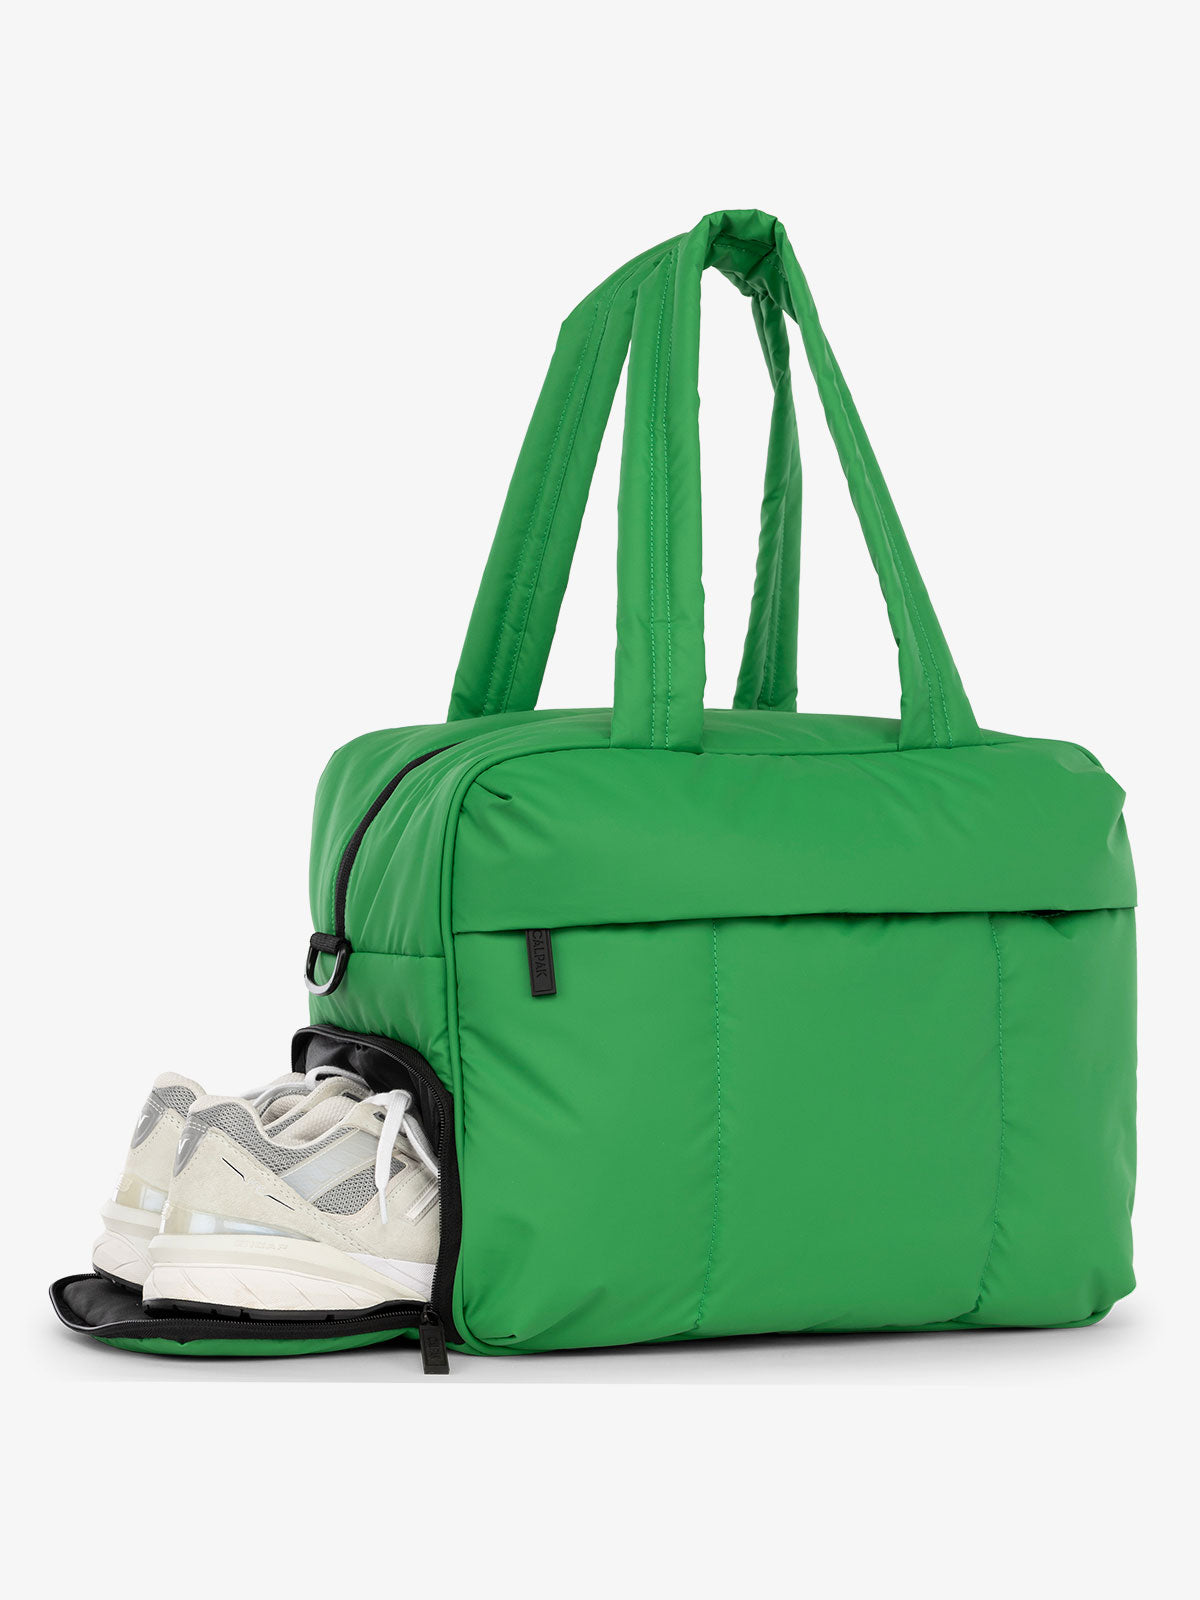 CALPAK Luka Duffel Bag with side shoe compartment and top handles in light green apple